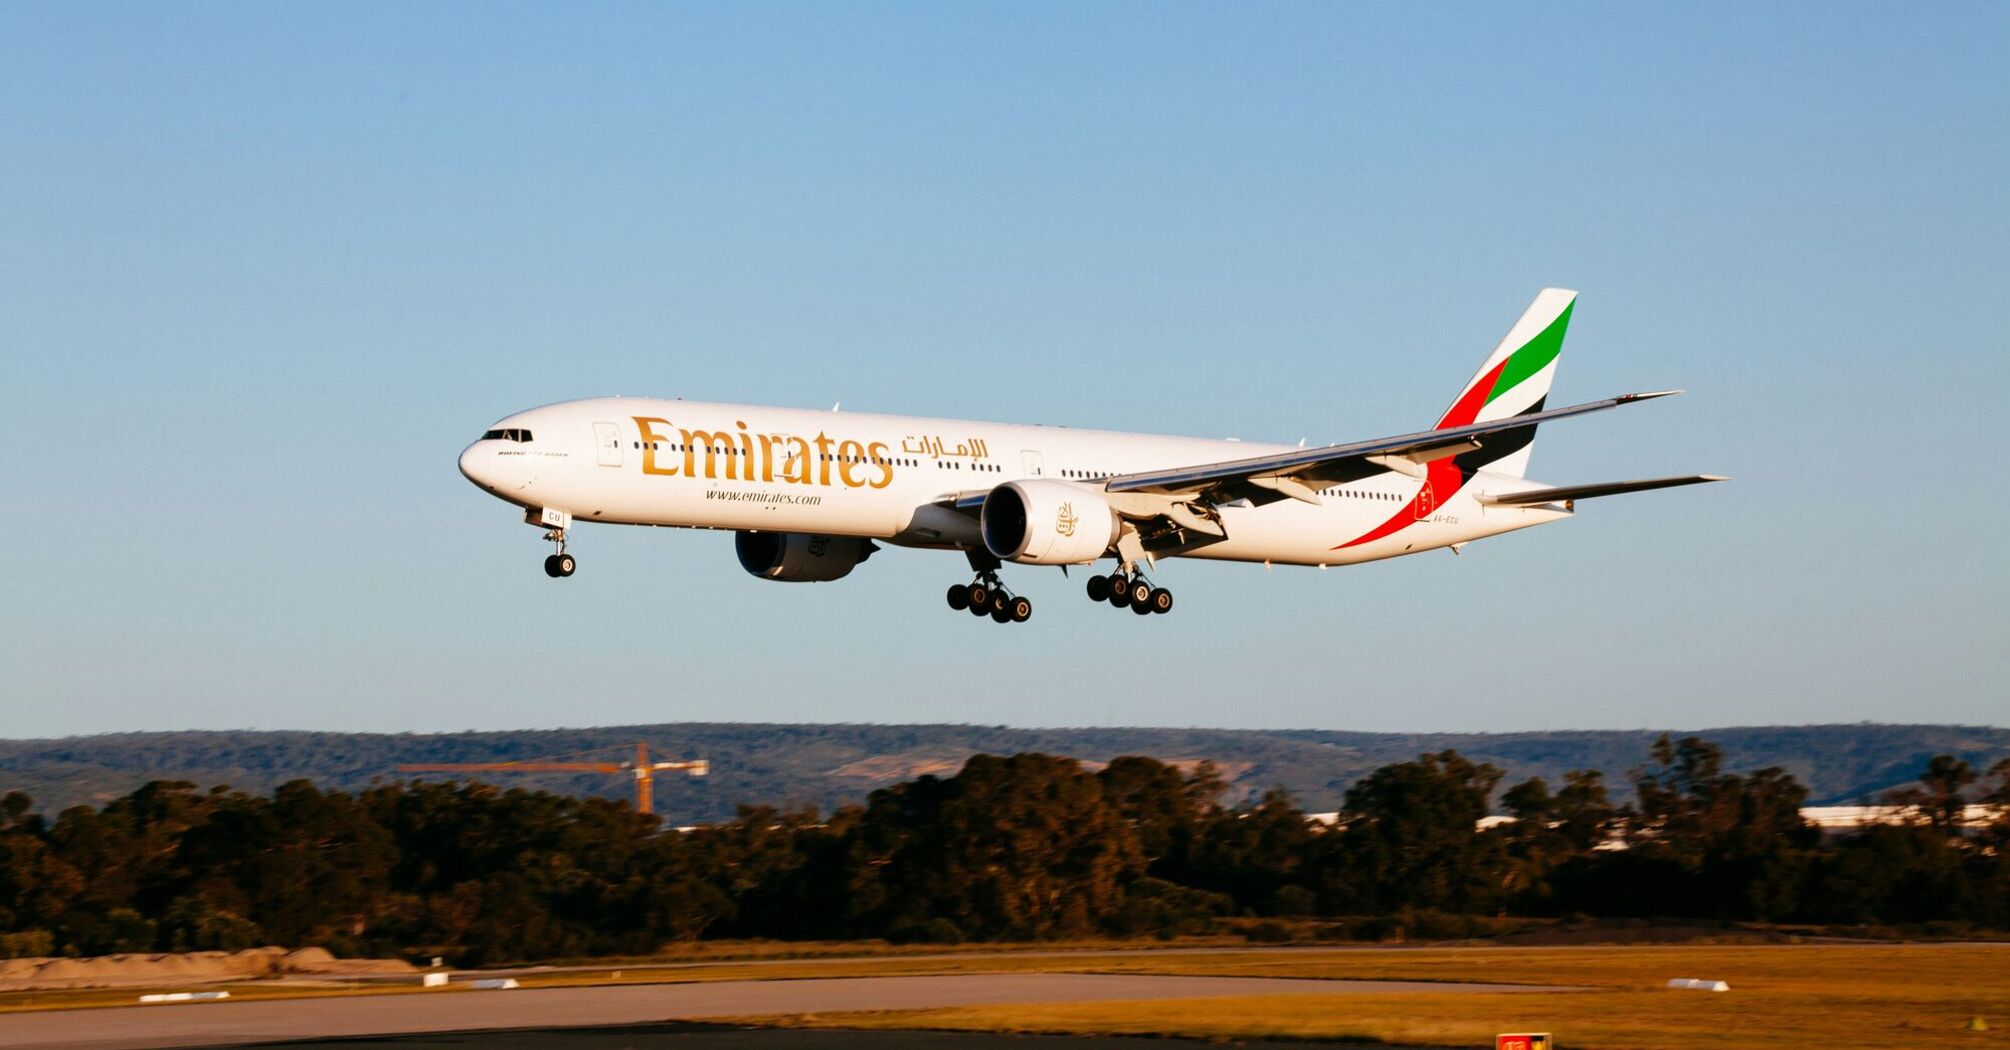 Emirates Boeing 777-300ER aircraft landing on the runway during the daytime